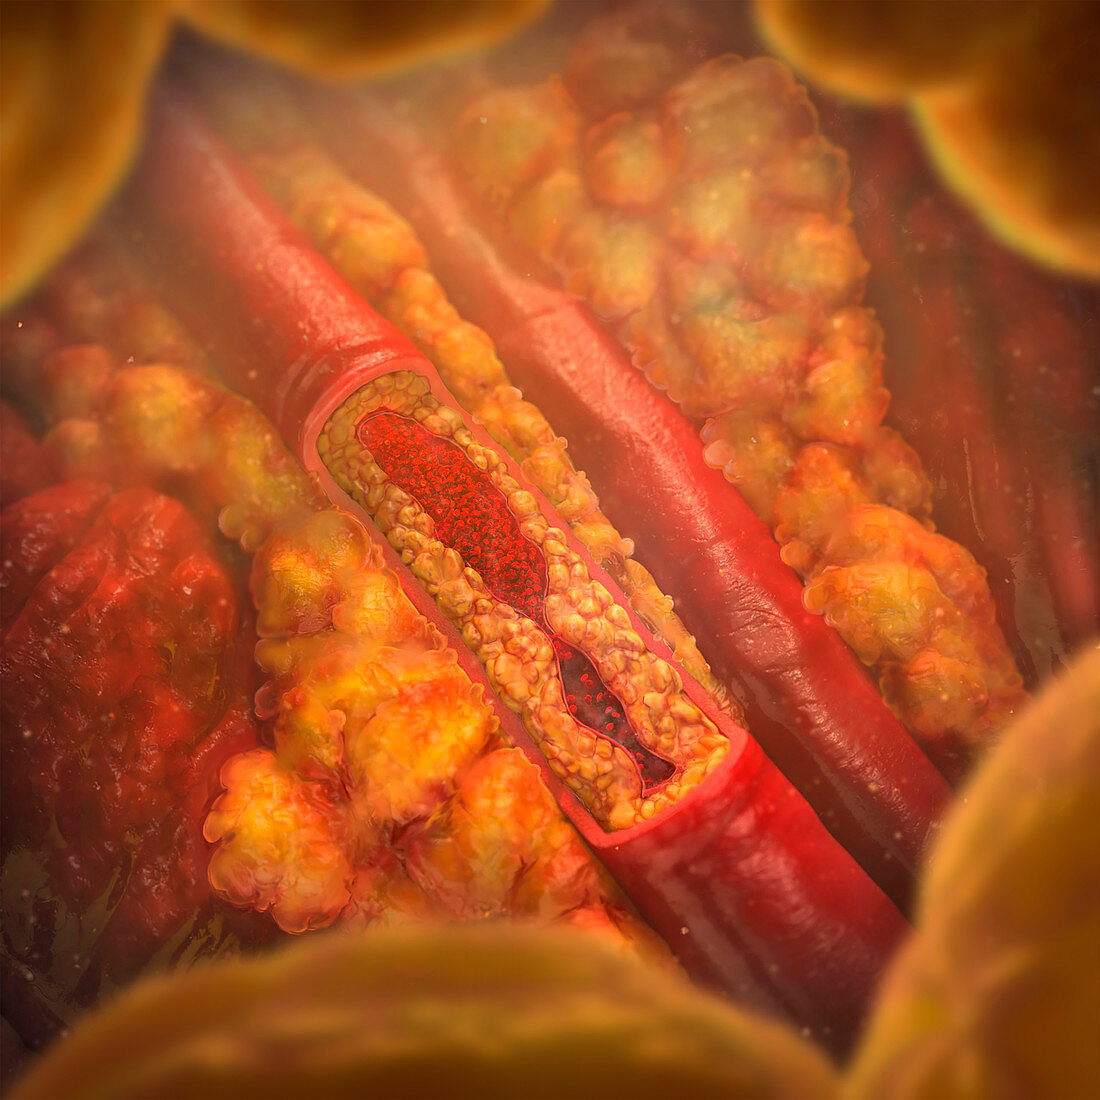 Atherosclerosis in an artery, illustration